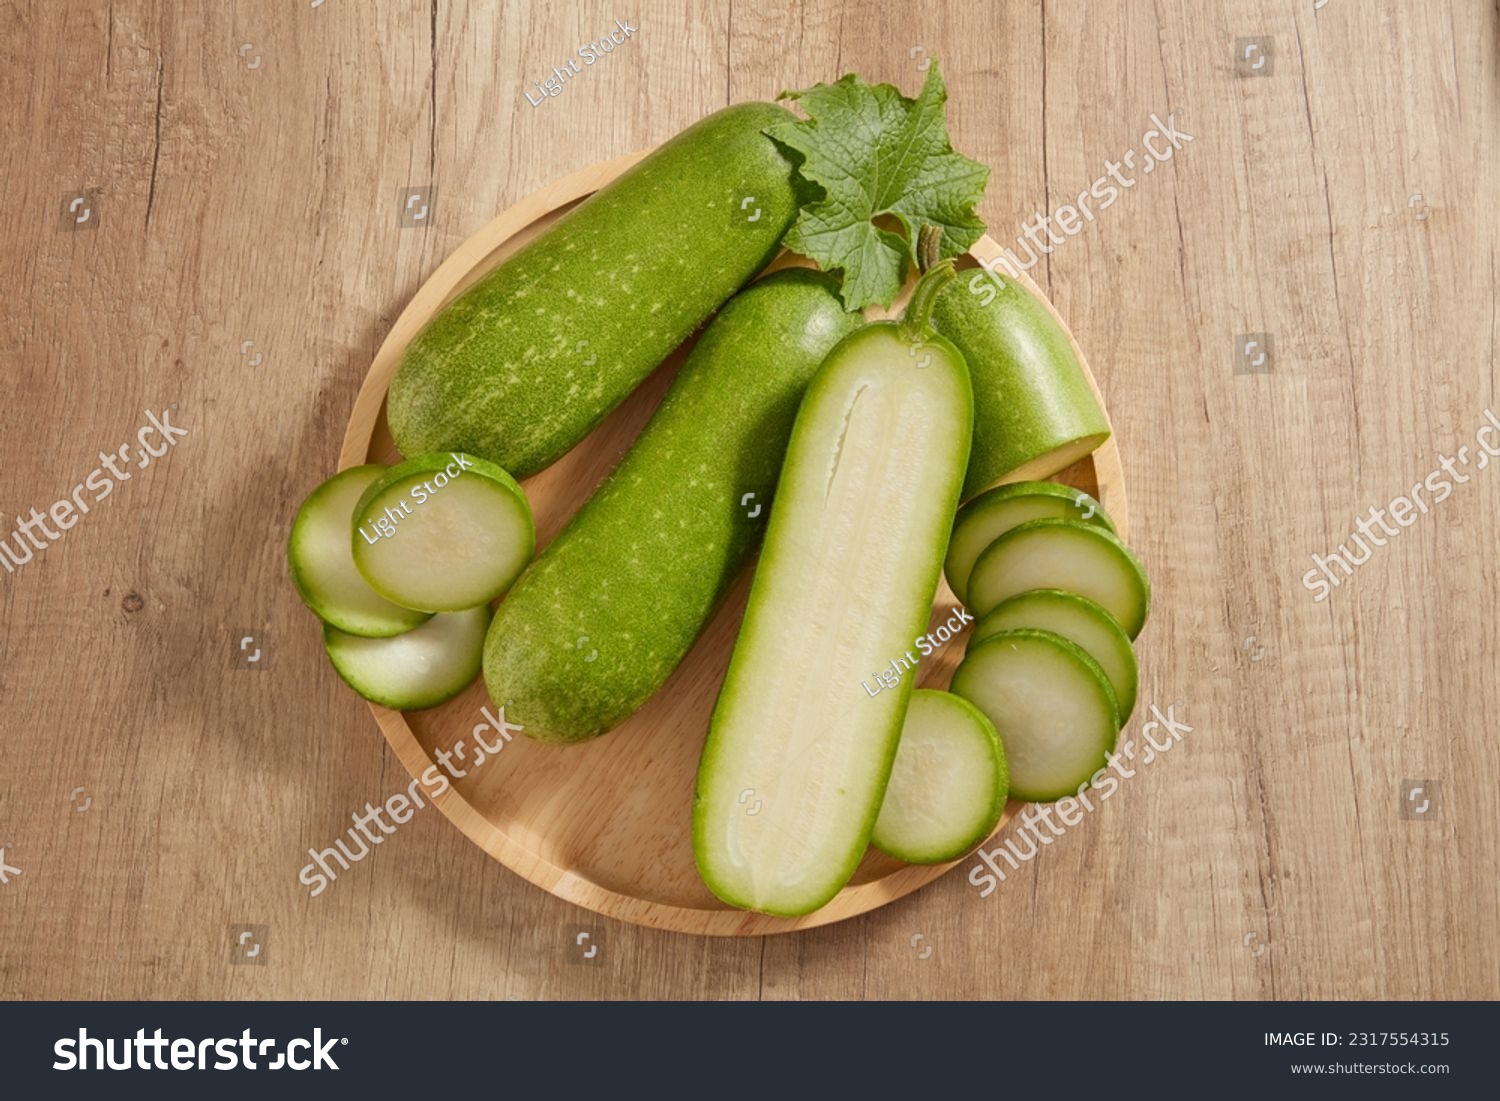 Top view of a wooden tray in round-shaped containing many round slices of winter melon. Winter melon (Benincasa hispida) is rich in vitamin C and antioxidants that improve skin health #2317554315